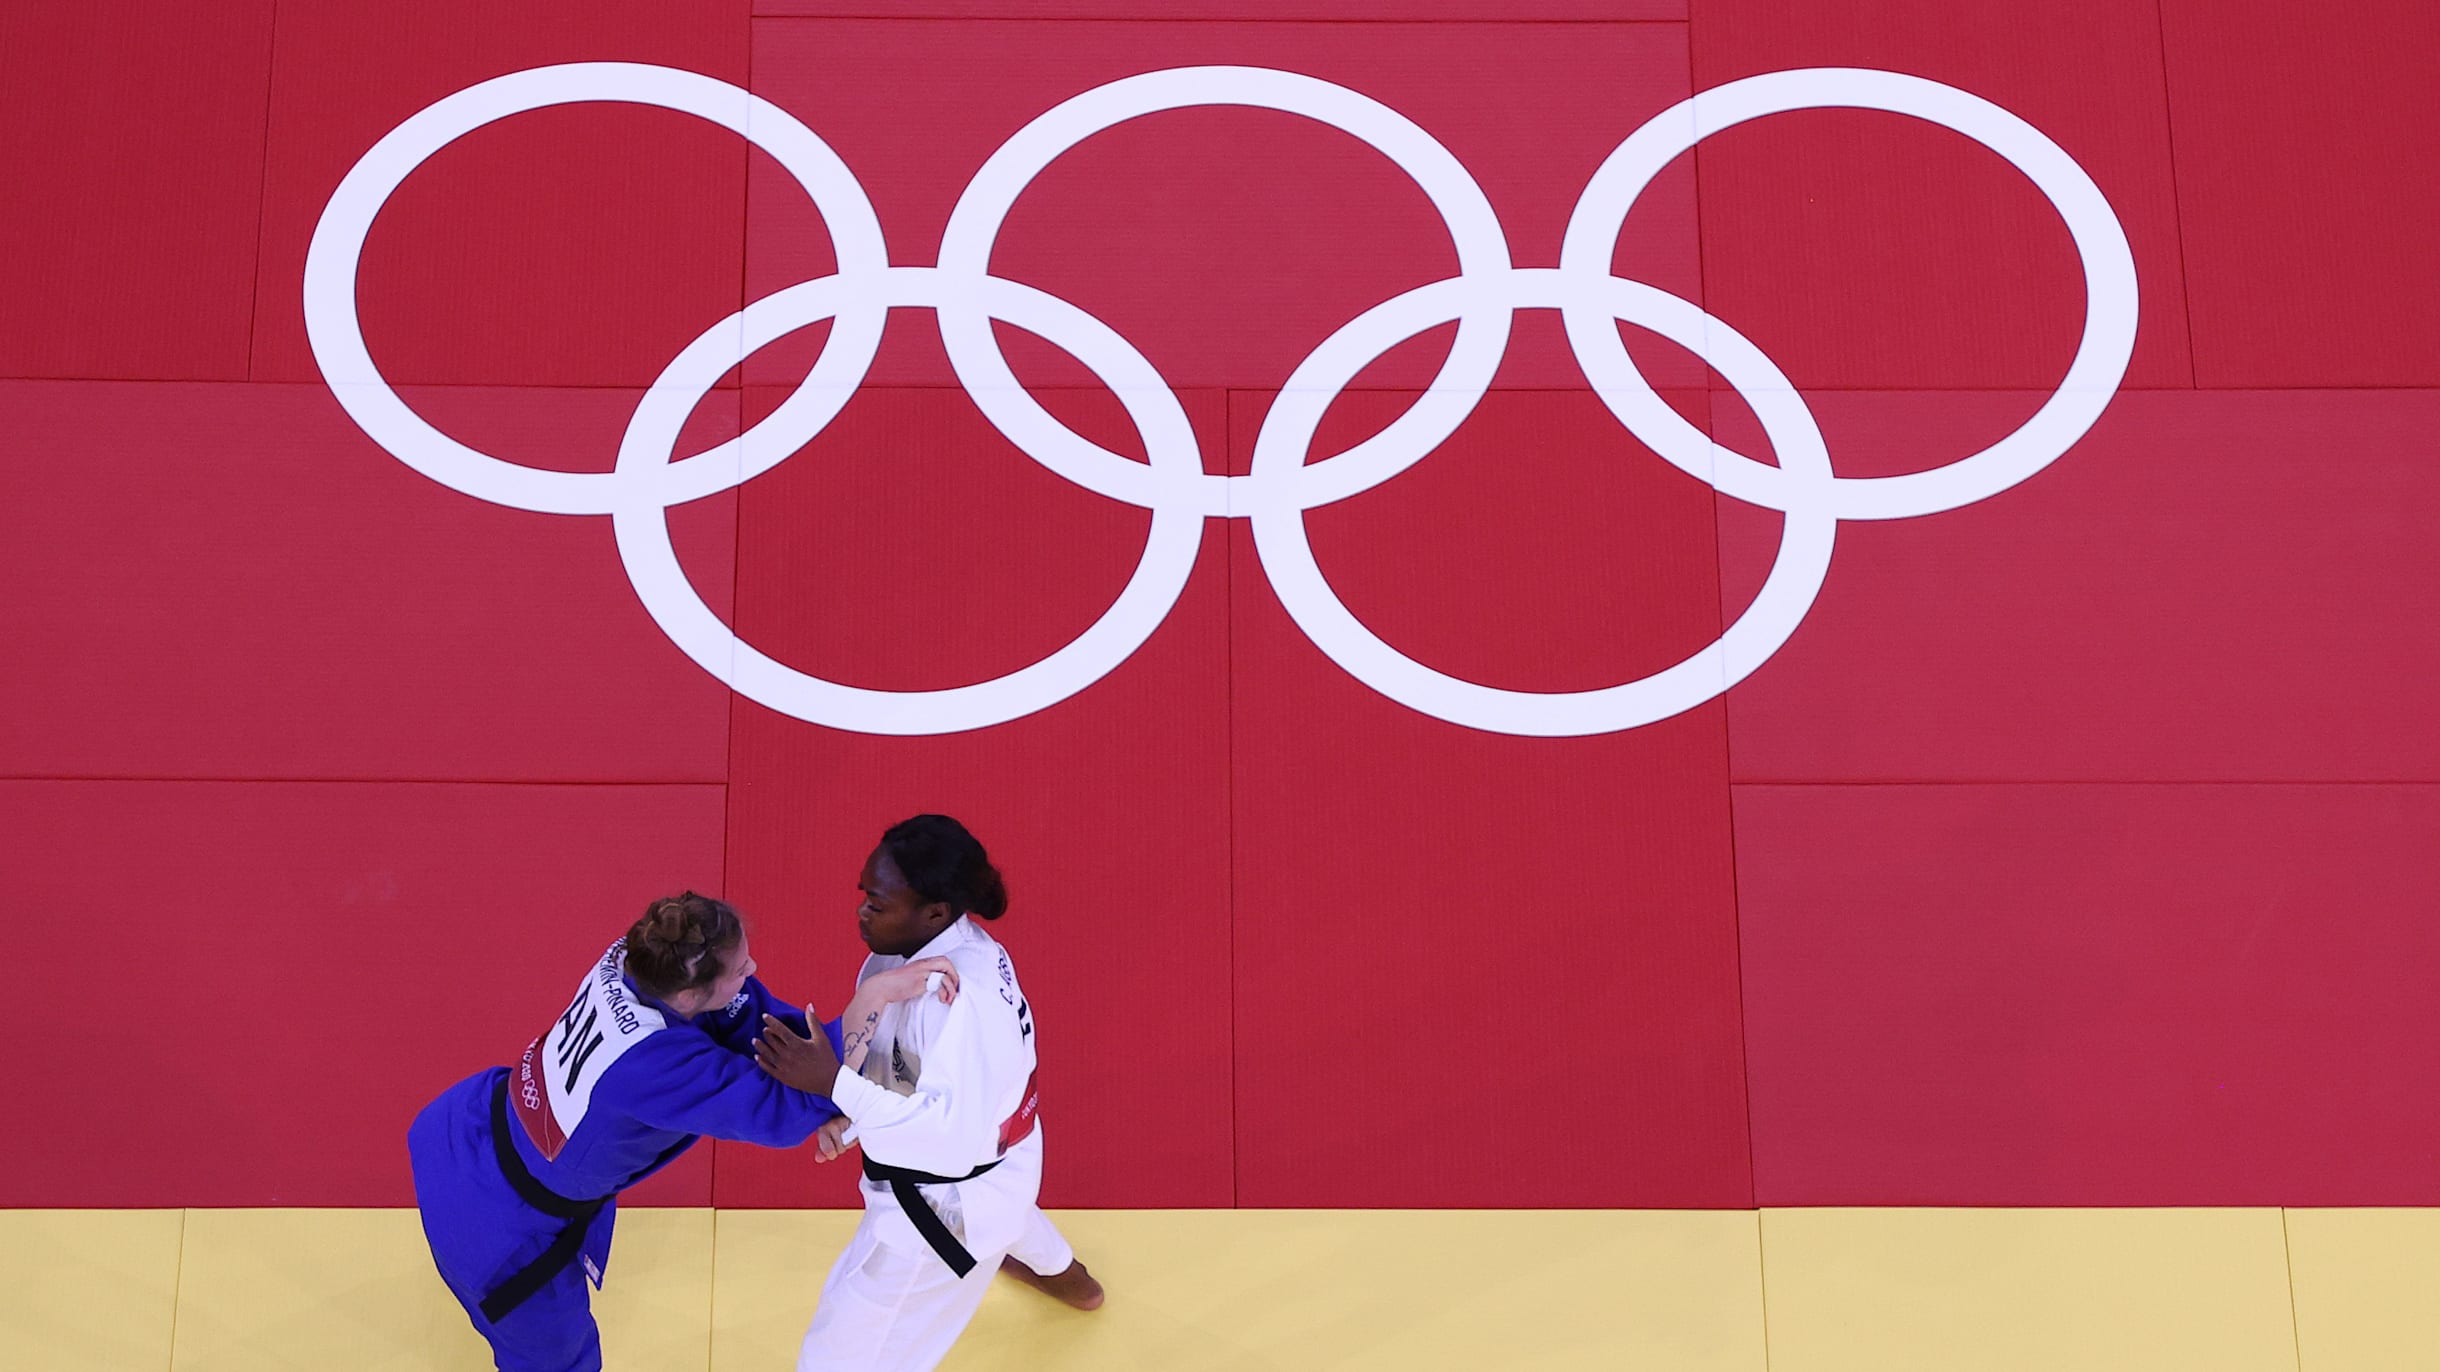 How to qualify for judo at Paris 2024